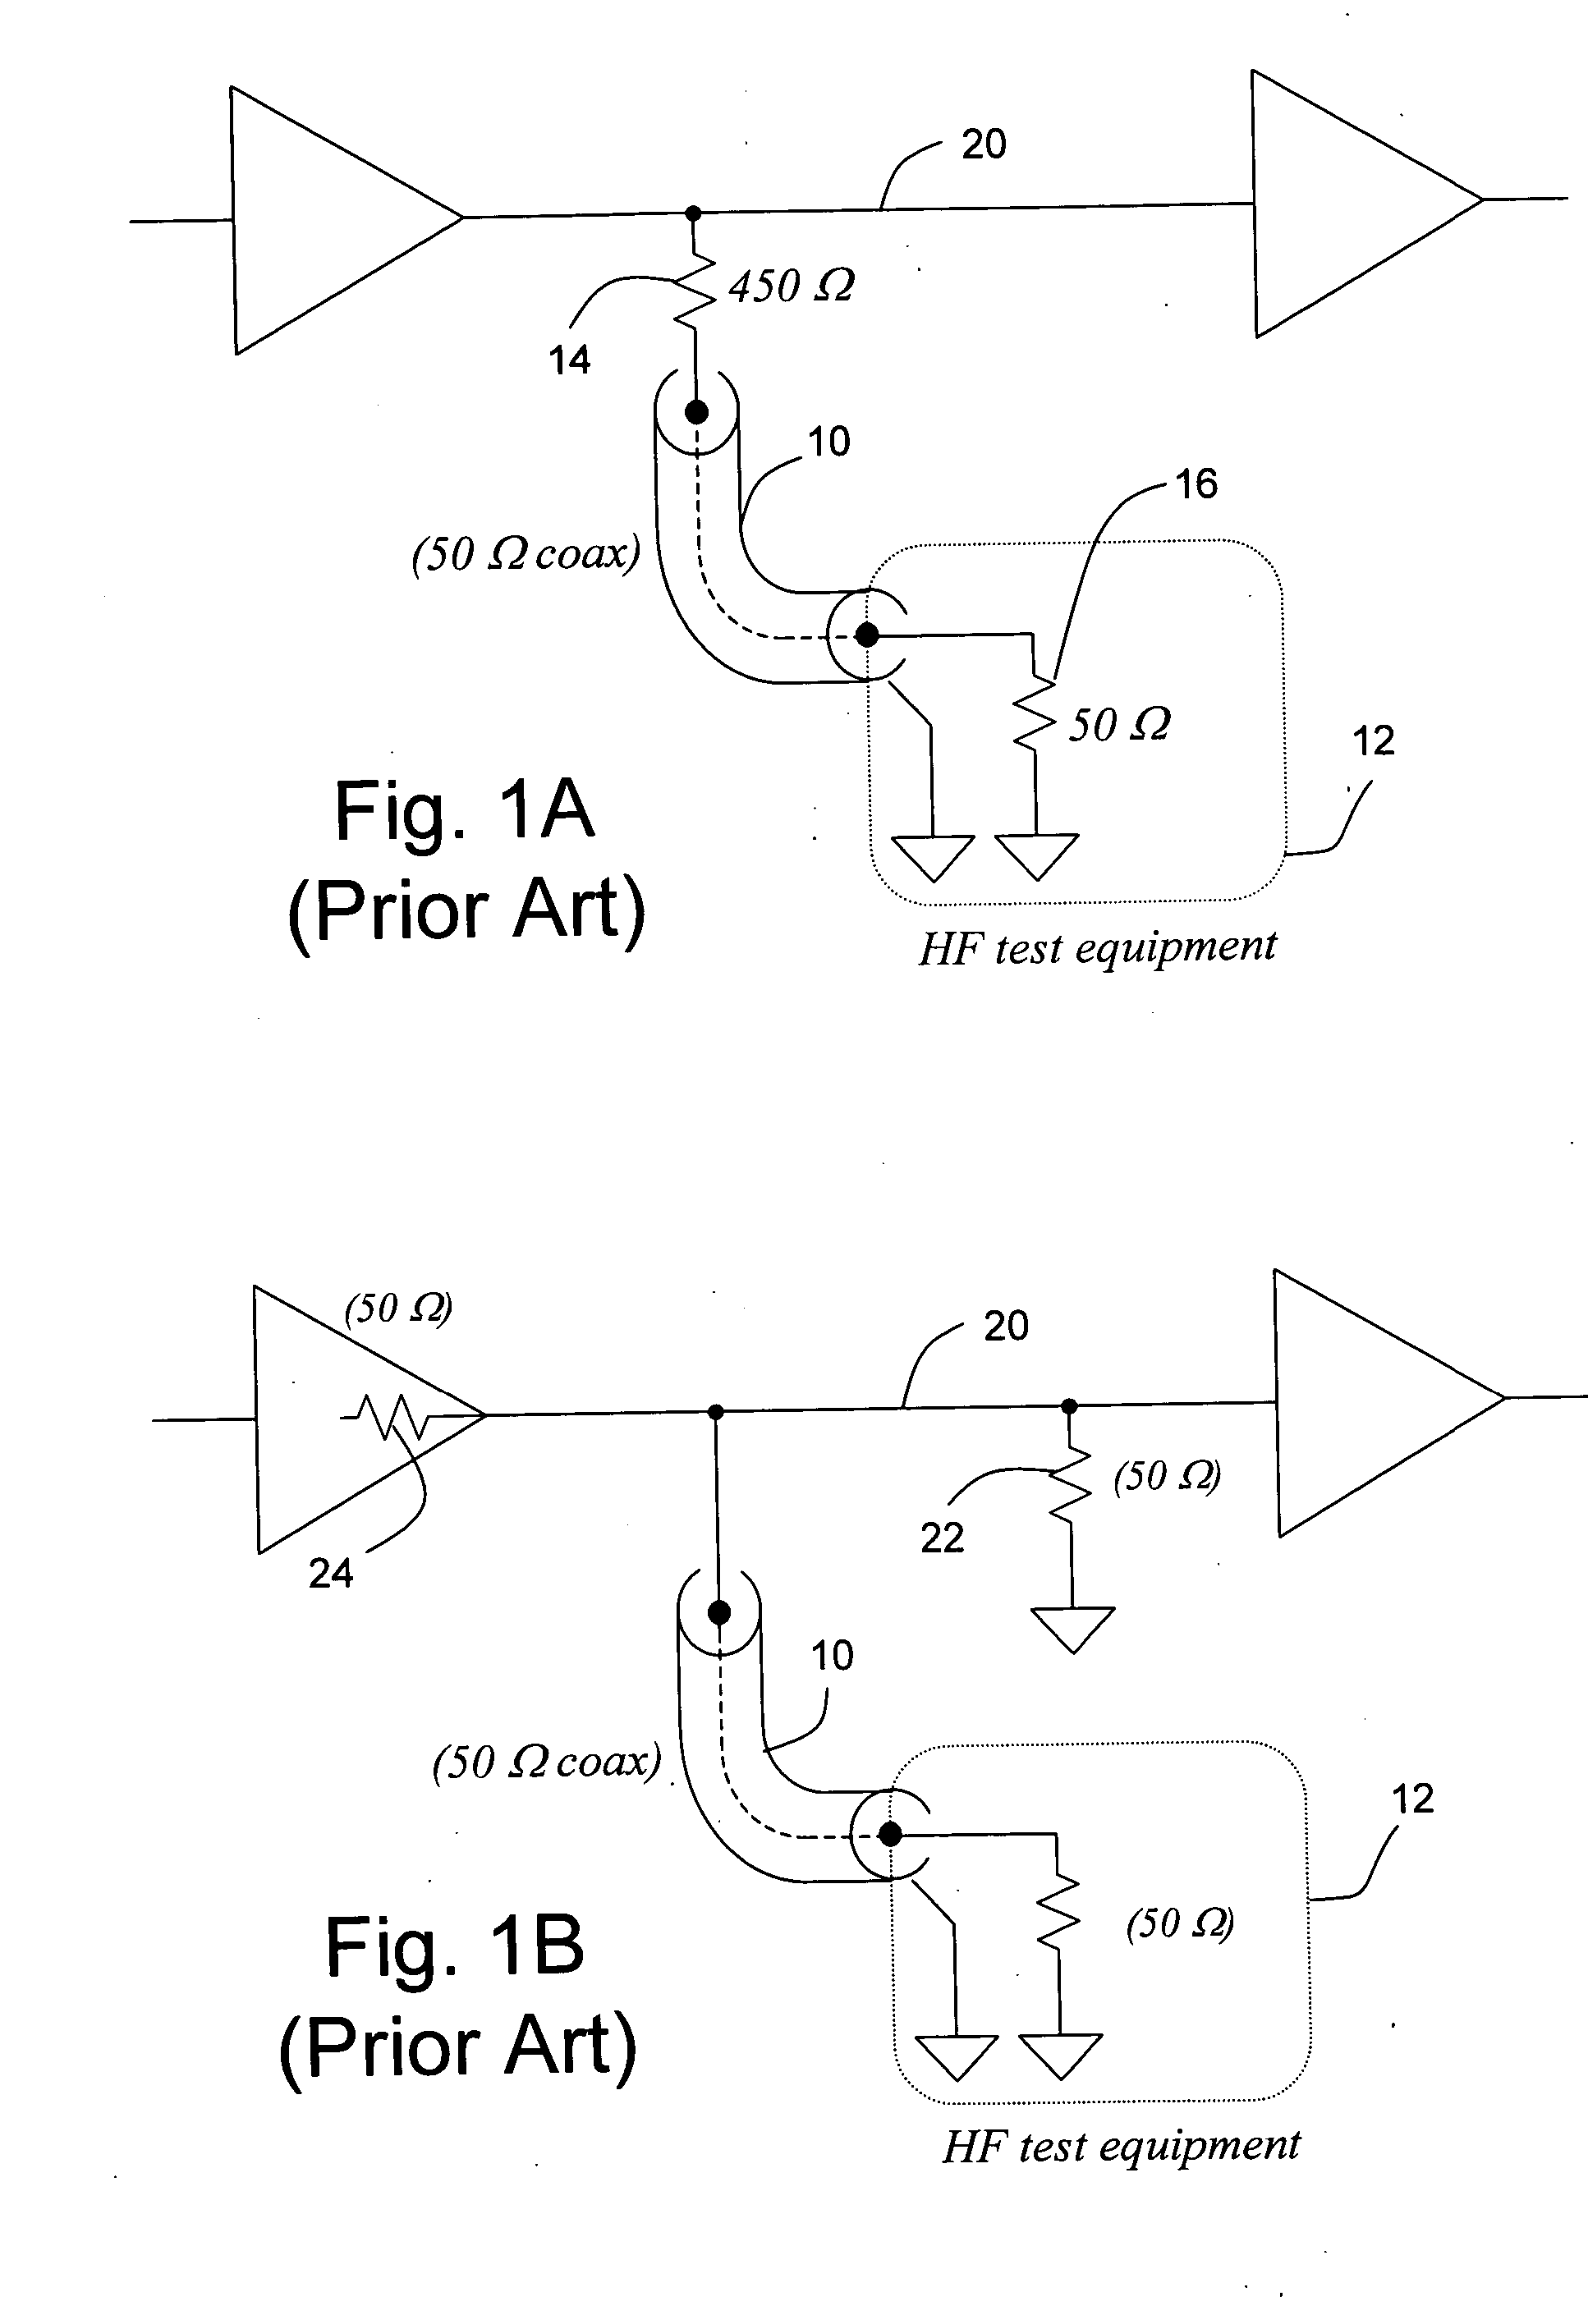 Circuit and method for low frequency testing of high frequency signal waveforms